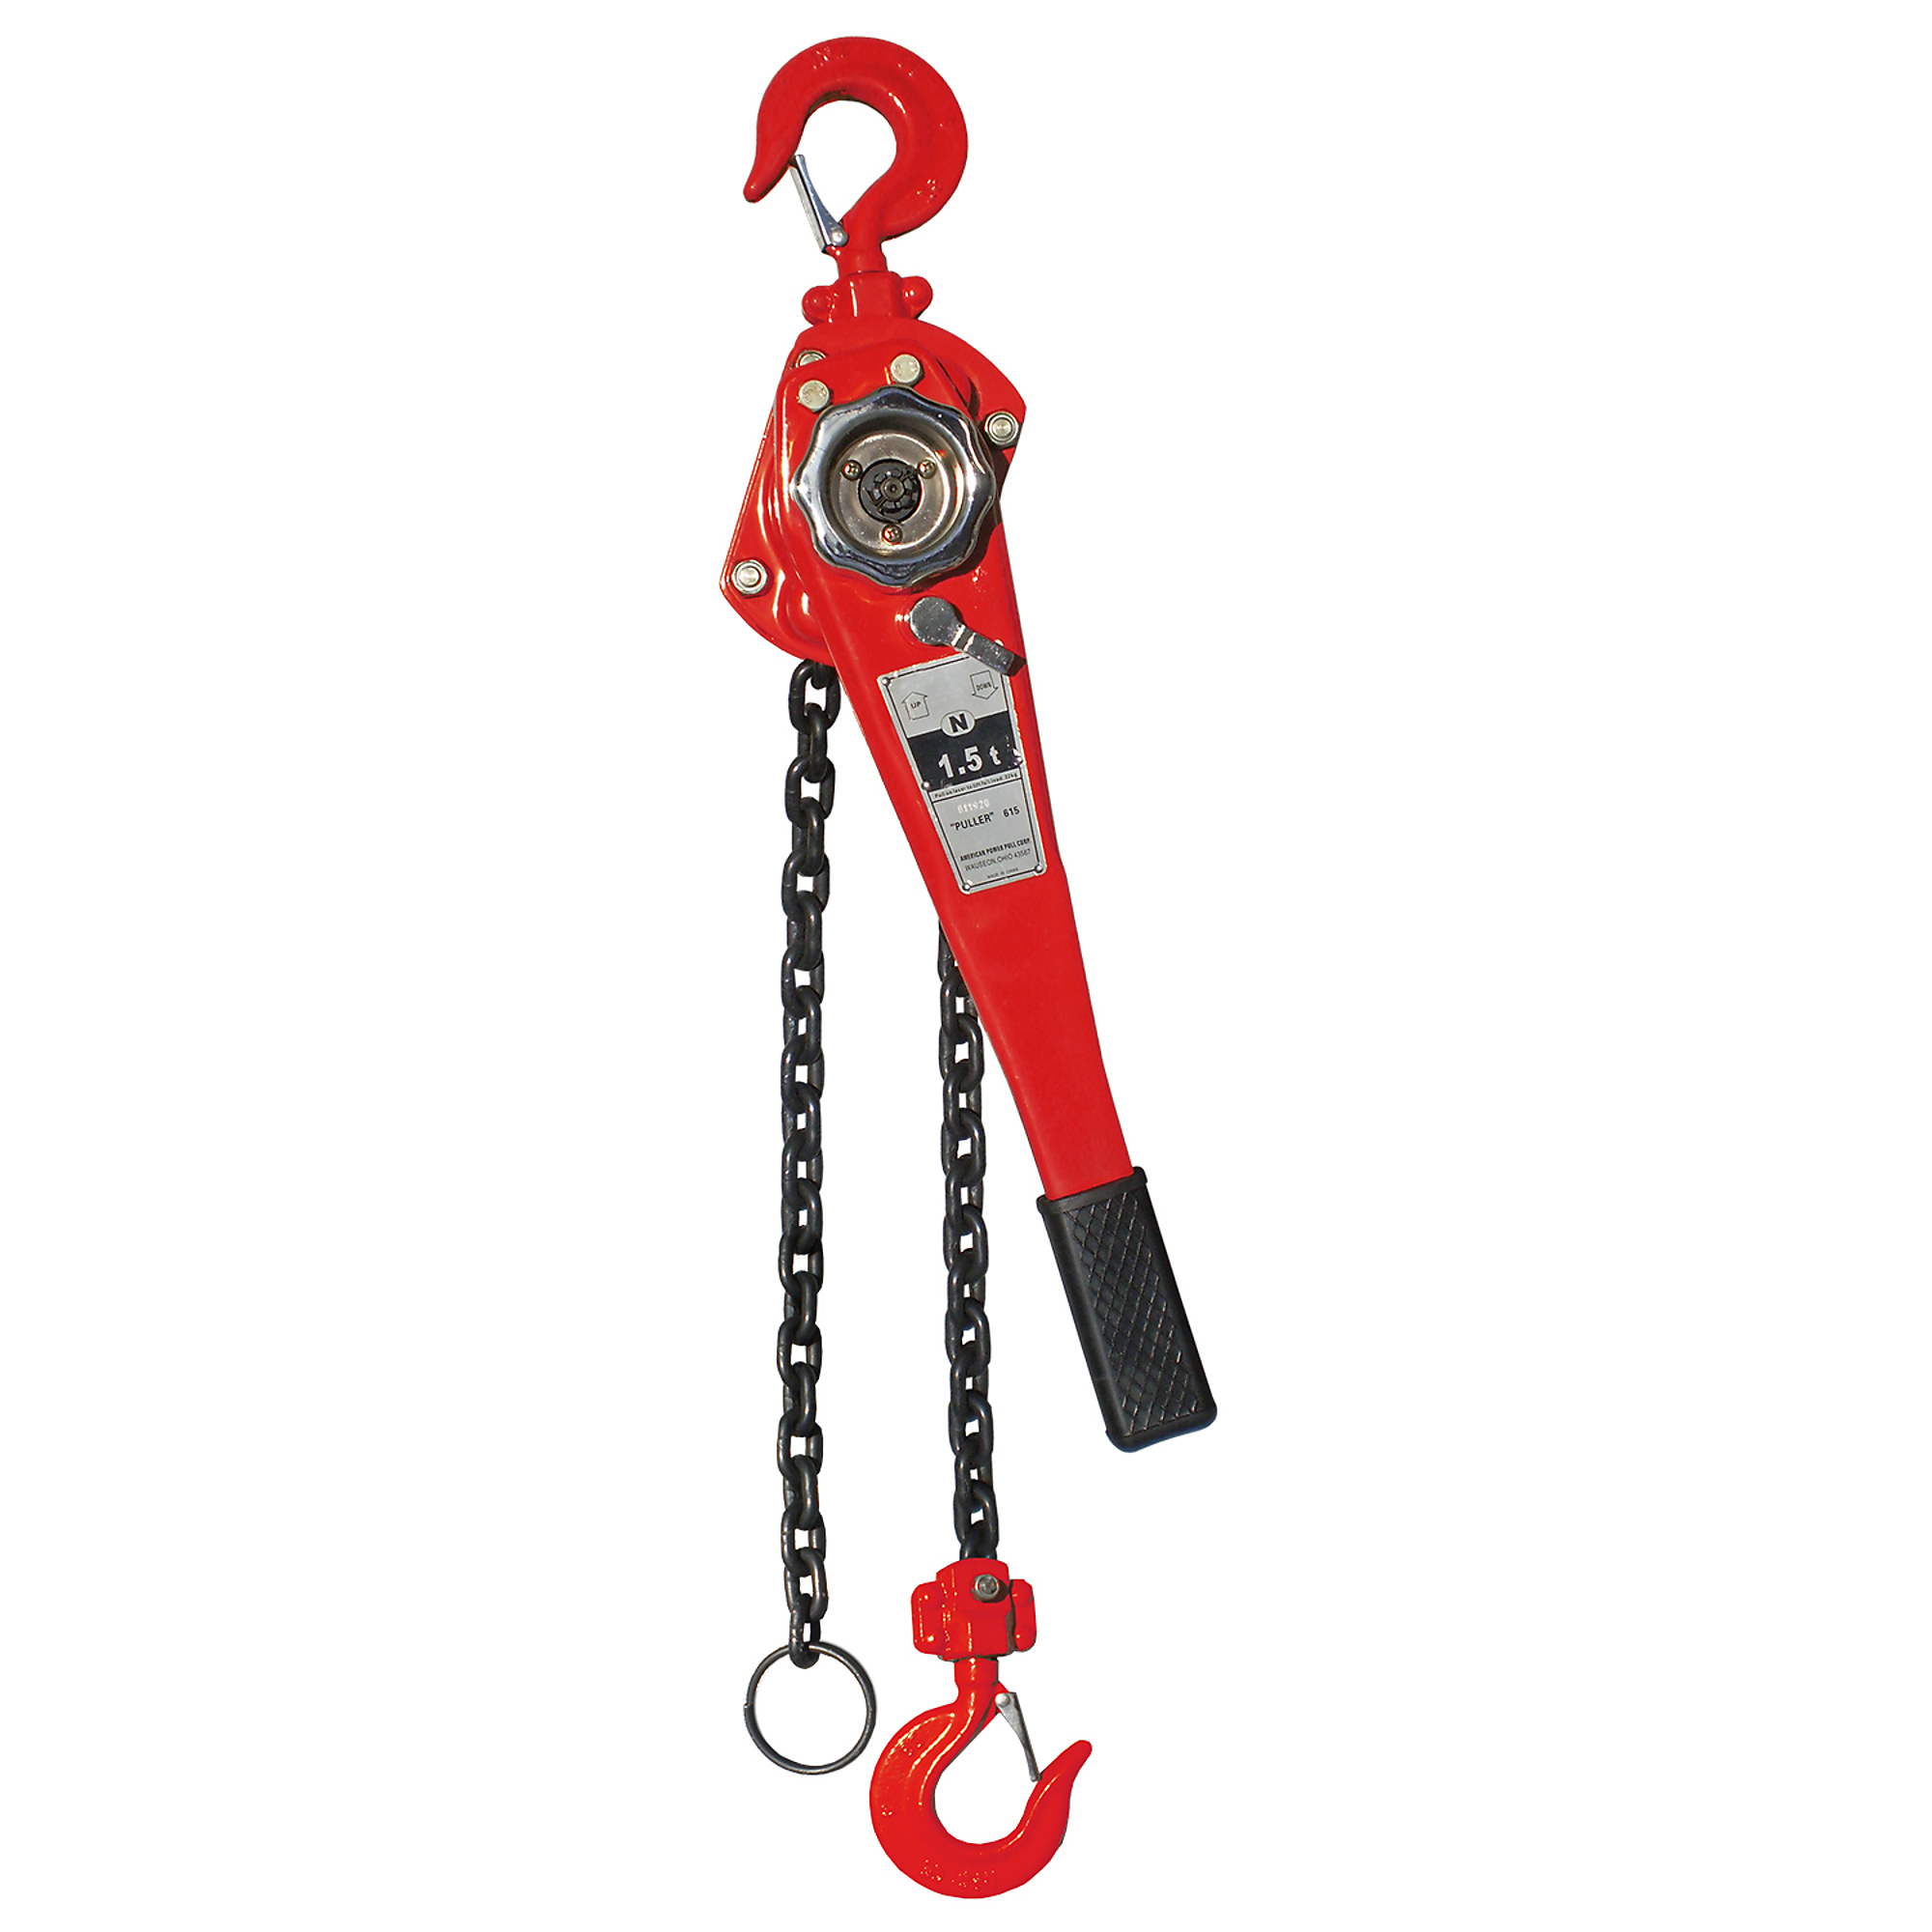 American Power Pull, 1.5 ton chain puller w/ 10ft. lift, Power Source Manual Lever, Capacity 3000 lb, Lift Height 10 ft, Model 615-10